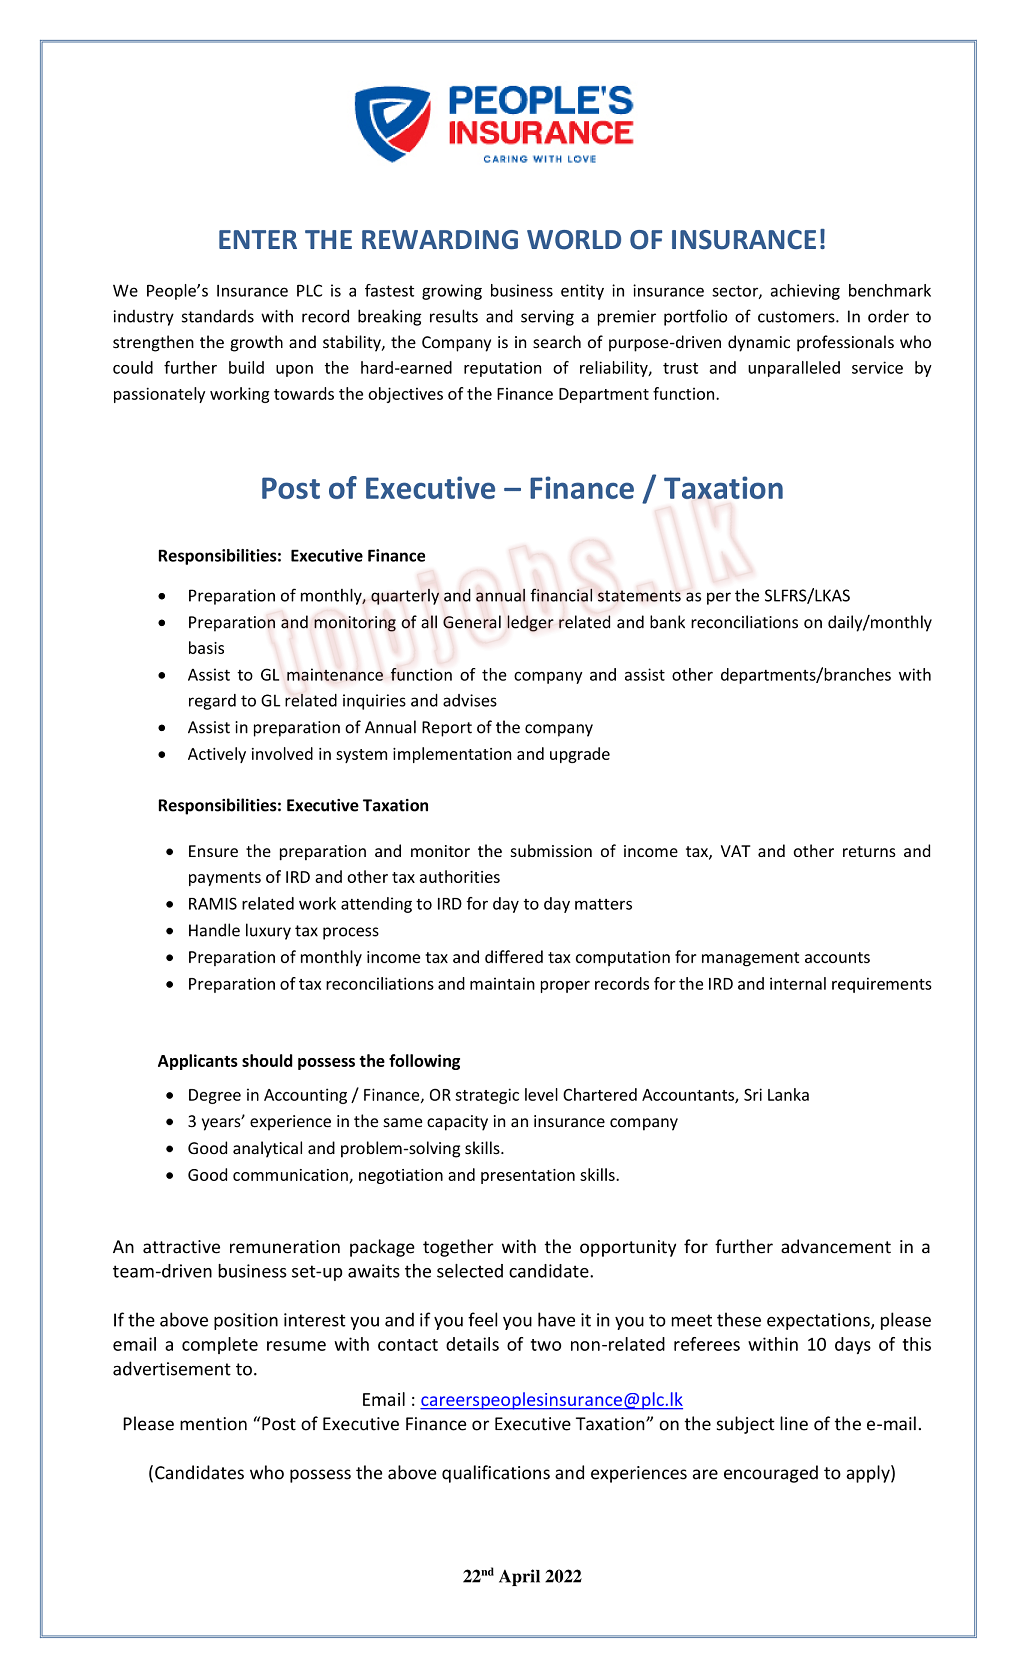 People's Insurance Vacancy for Executive of Finance and Taxation